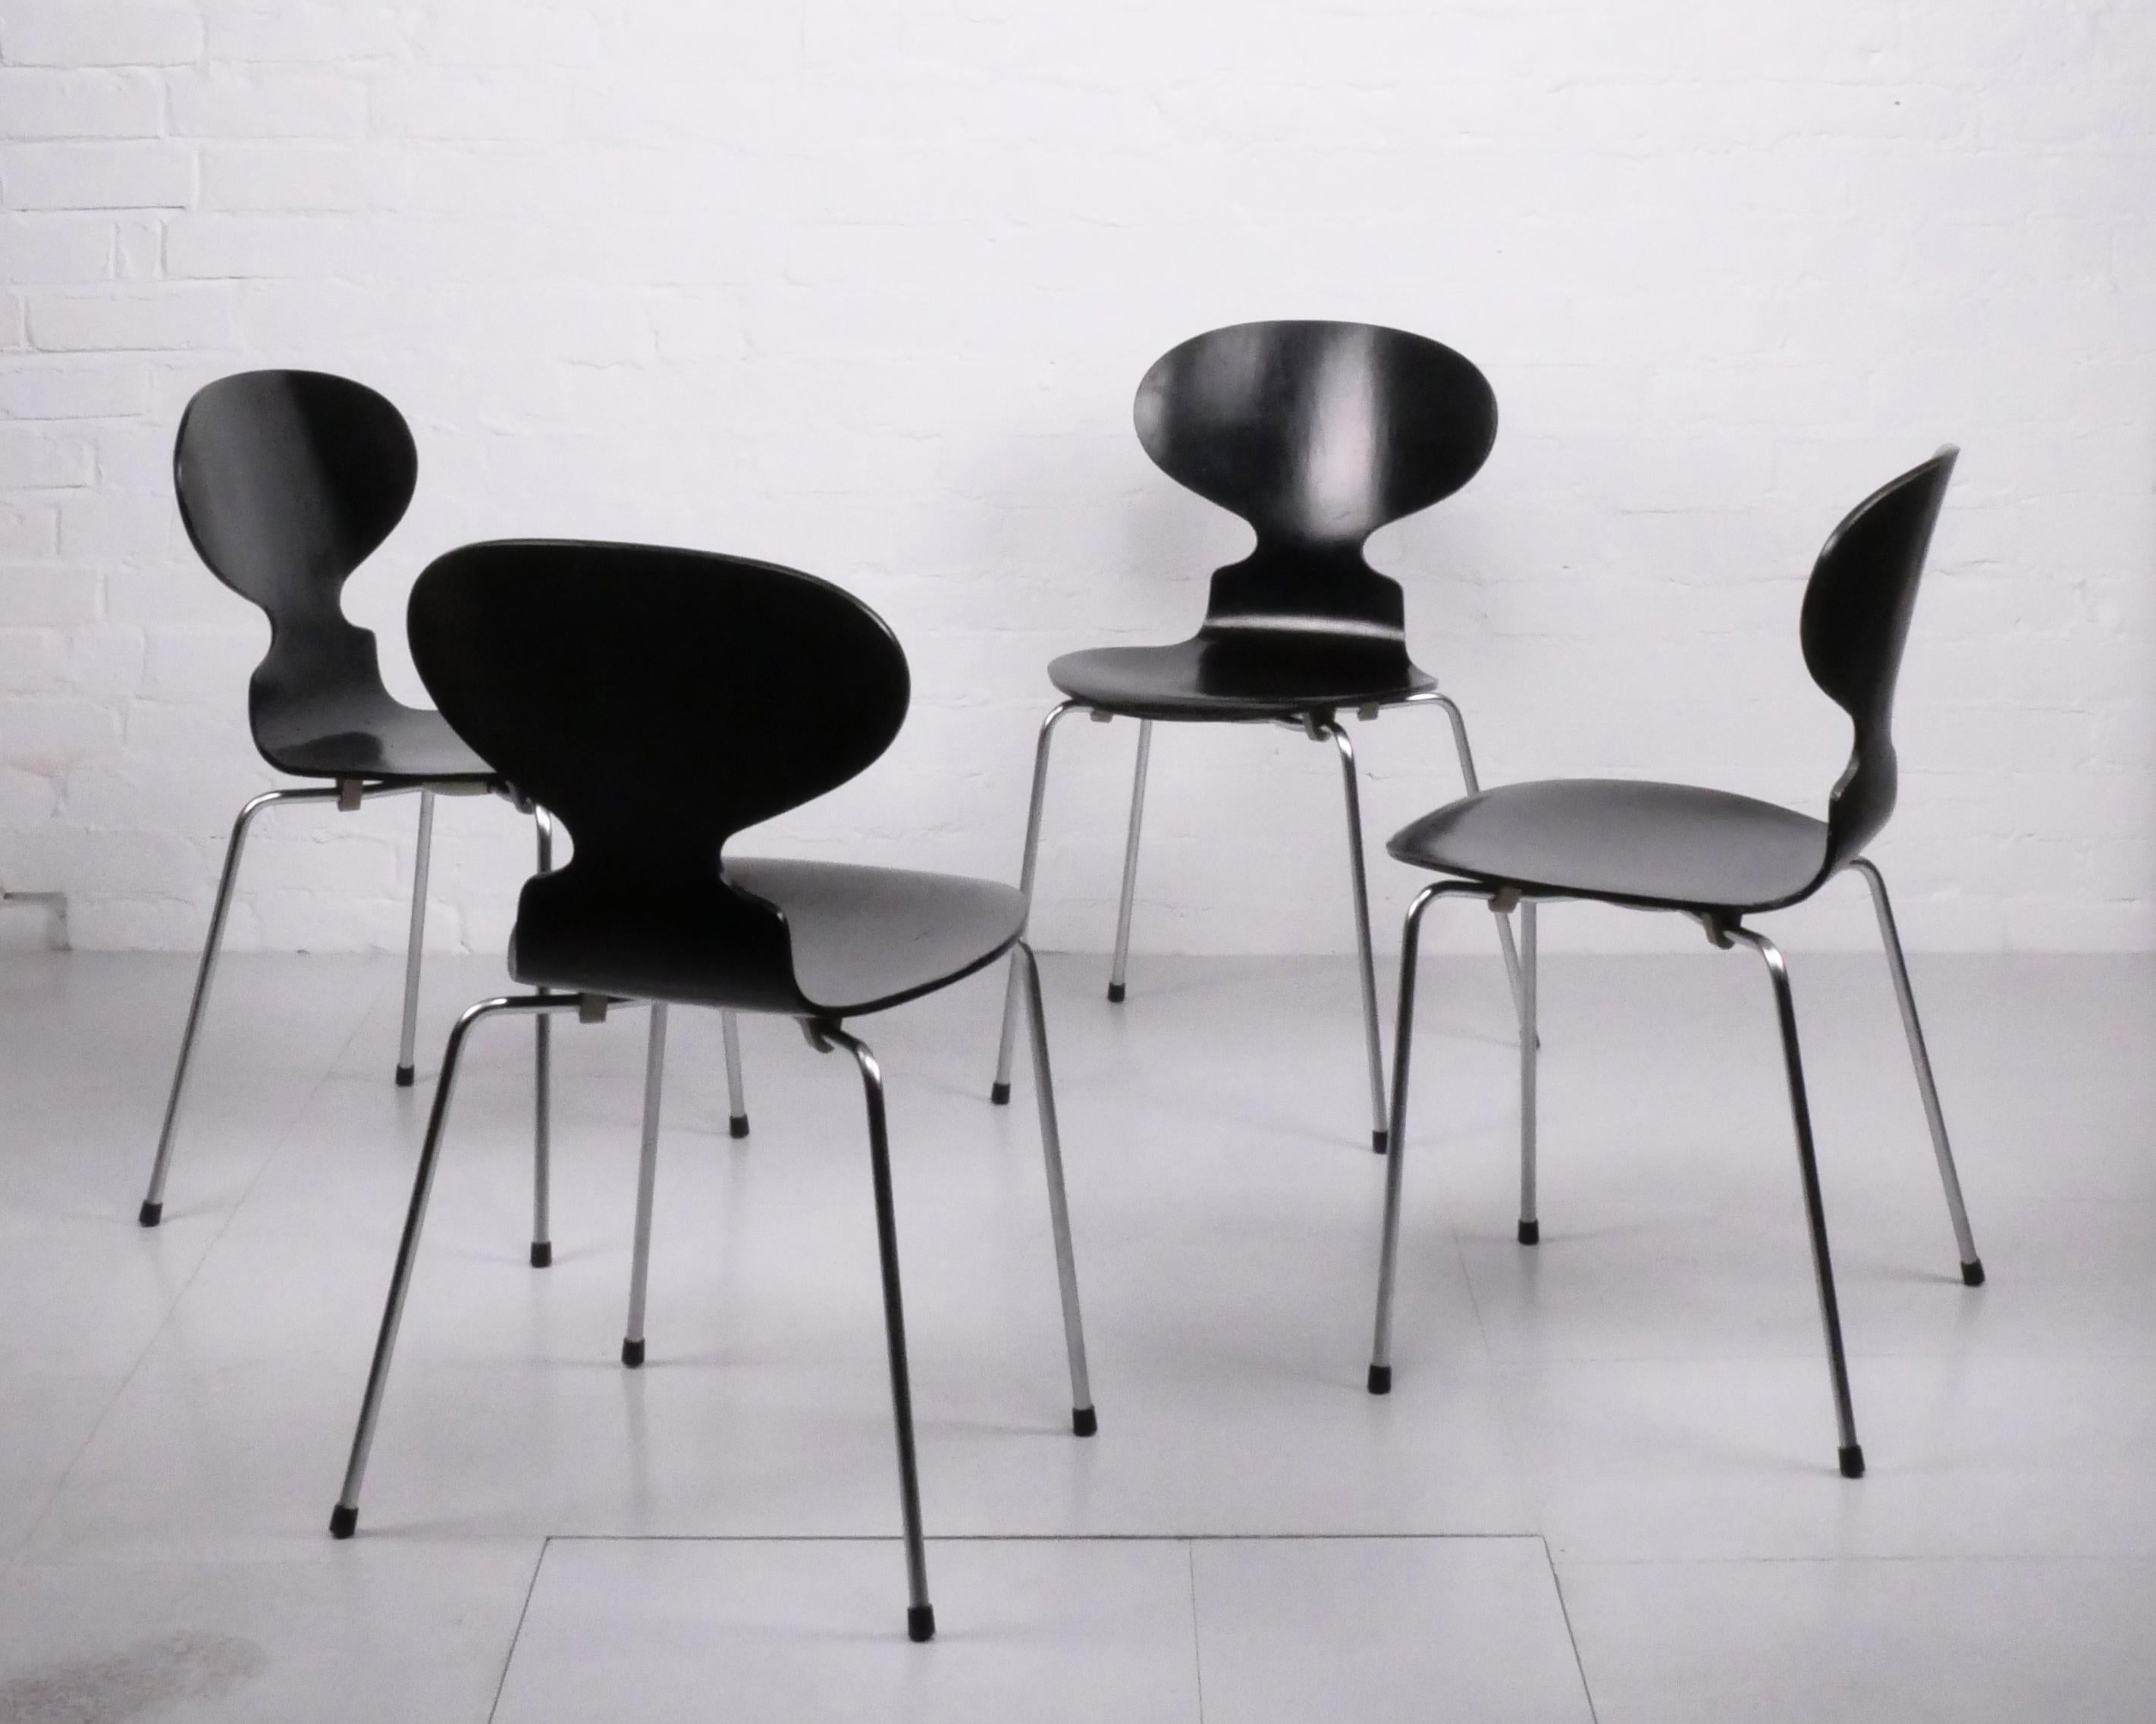 Arne Jacobsen (Designer), Denmark
Fritz Hansen (manufacturer), Denmark

Model 3101 ‘Ant’ Chair set of 4, designed 1952, manufactured 1971 (set 1) and 1978 (set 2)
Please note: we have two sets of 4 available. The listing price is for one set of 4.